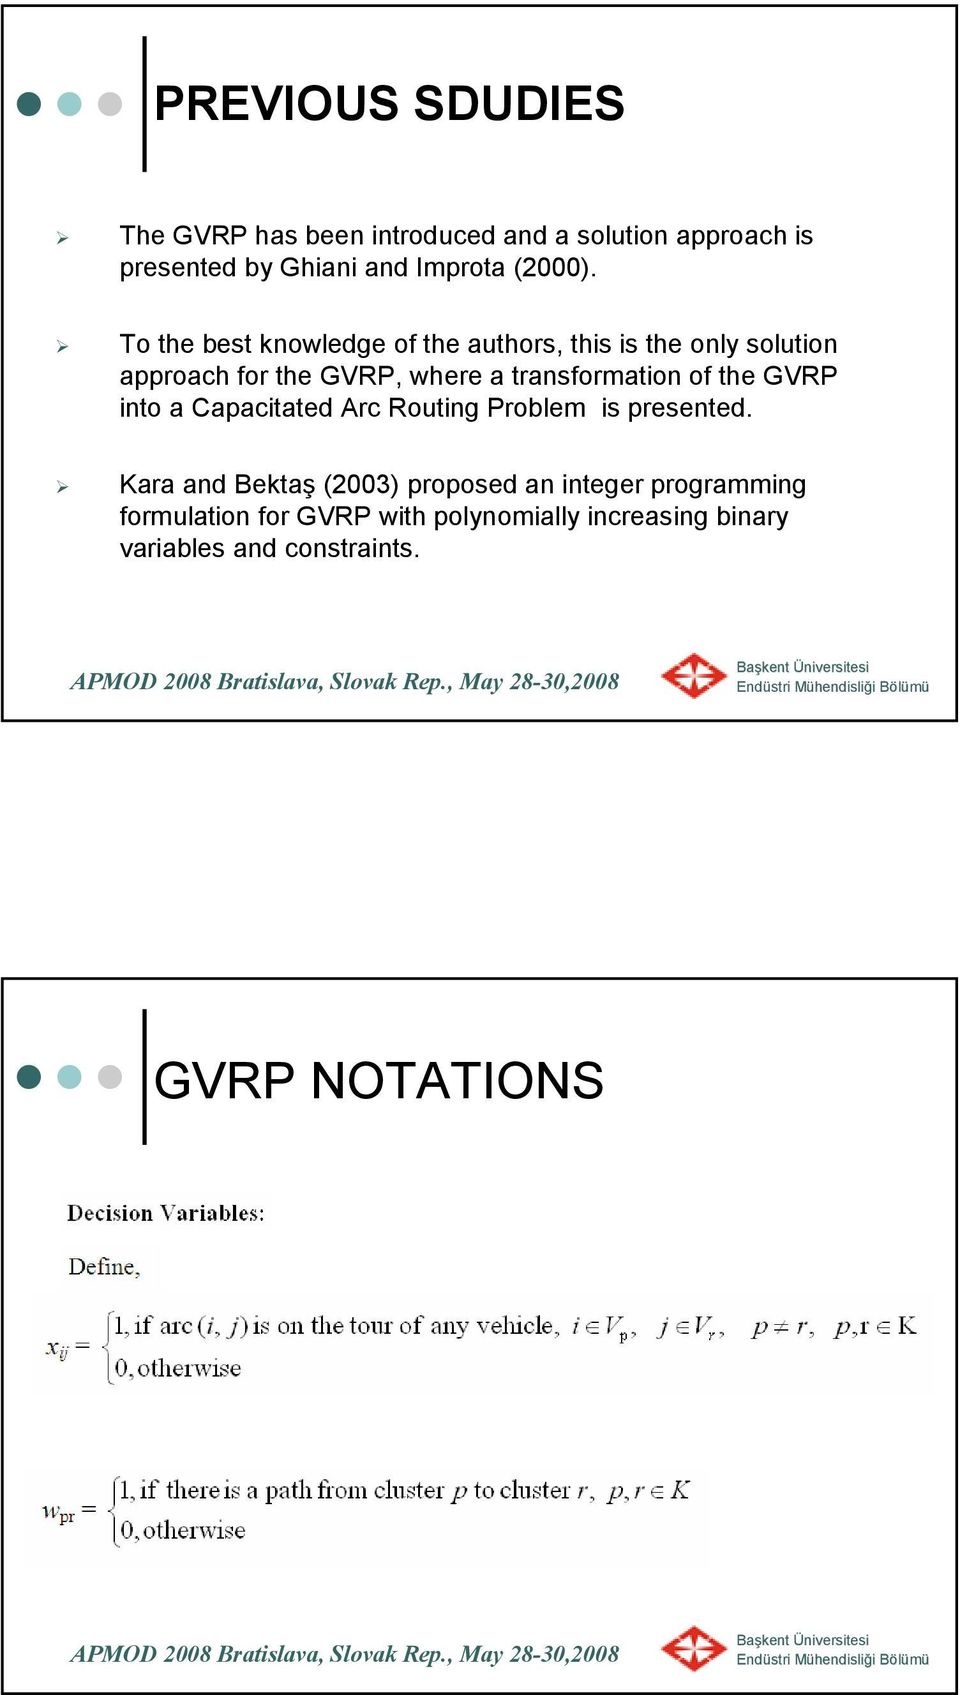 To the best knowledge of the authors, this is the only solution approach for the GVRP, where a transformation